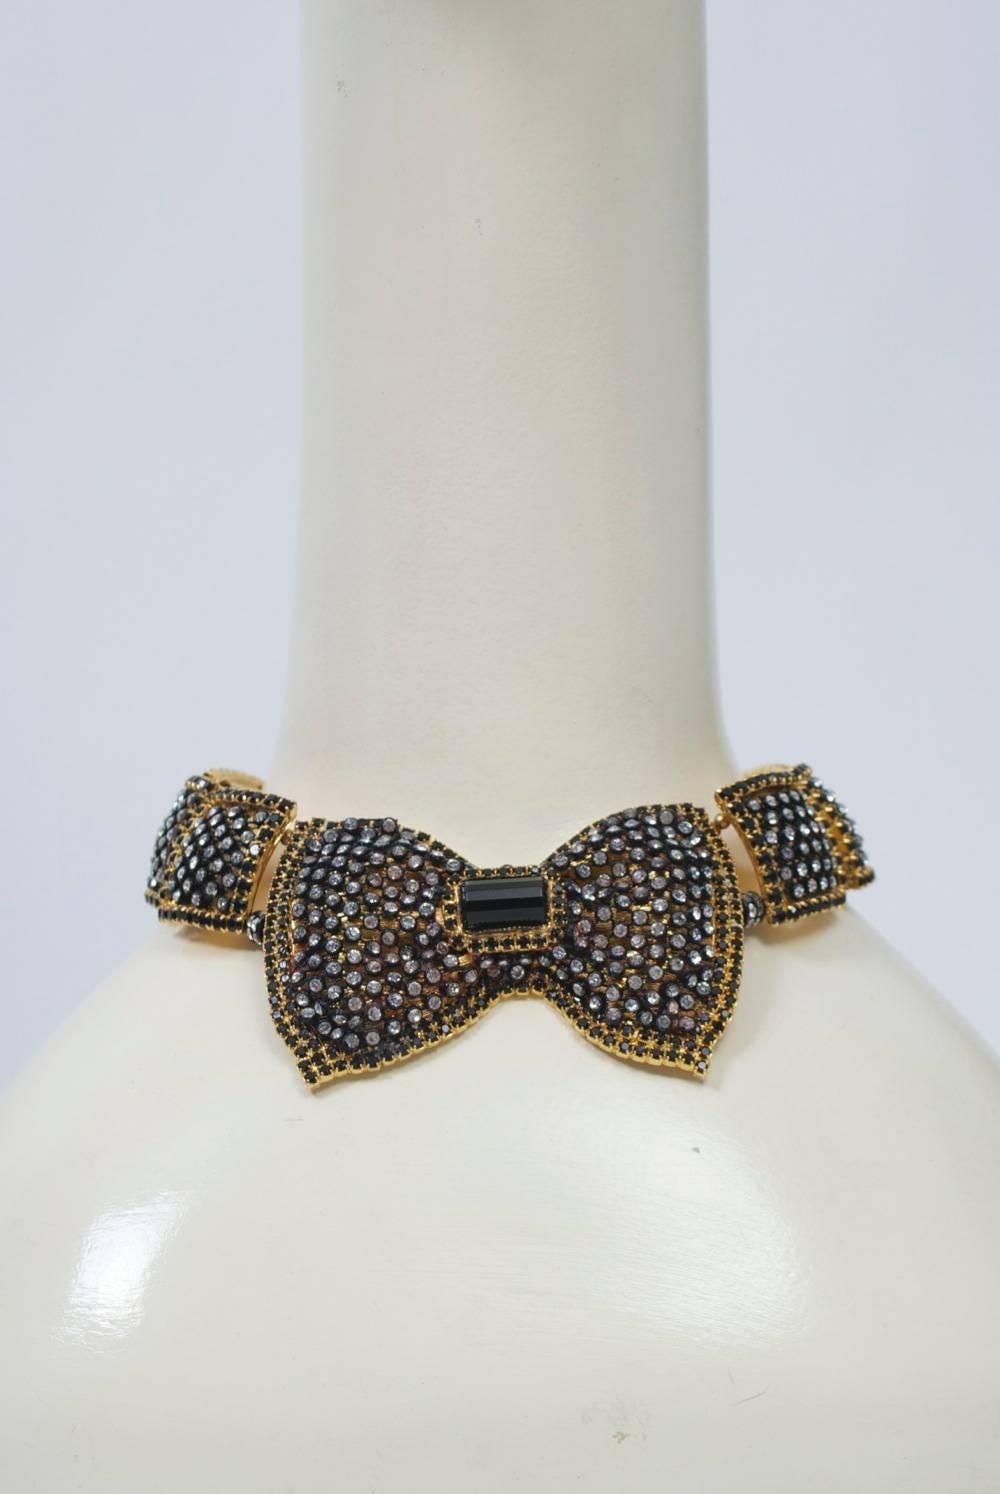 A prime example of the sought-after costume jewelry by William DeLillo, known for his runway pieces, this collar is composed of heavy gold metal links centering a large bow, each component embellished with rhinestones set in black mesh and